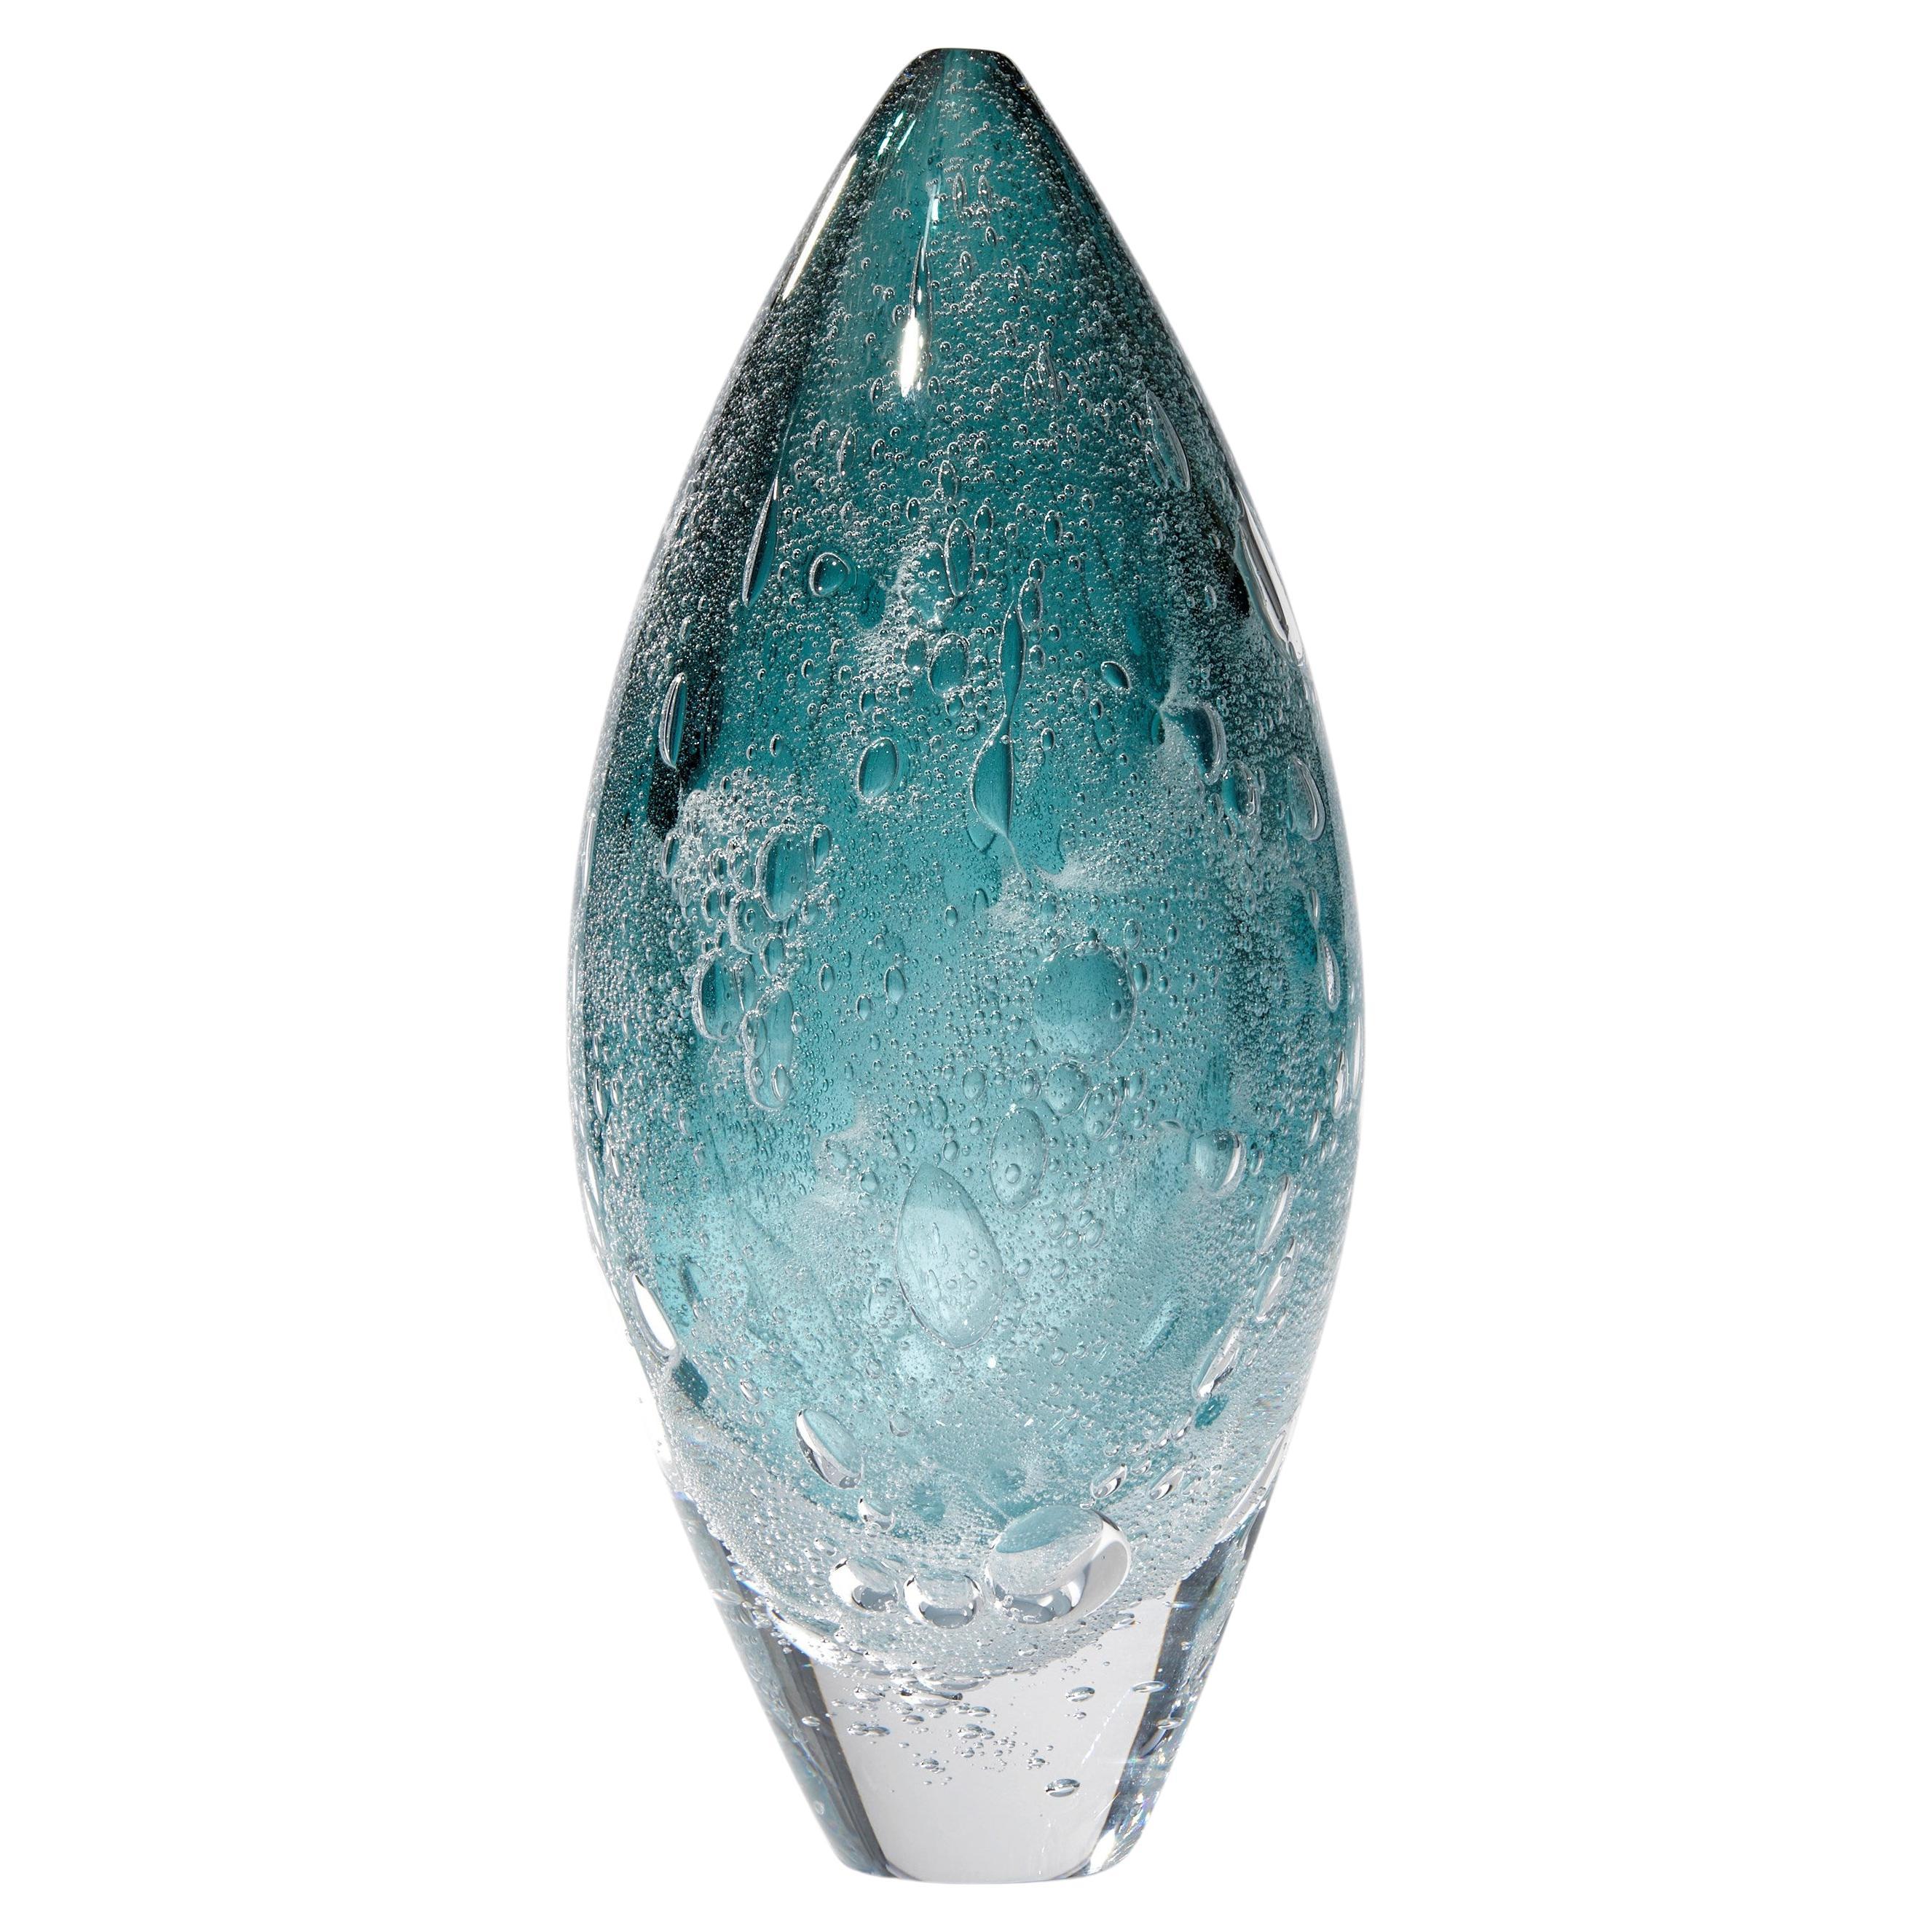 Turbulence in Steel Grey, a Teal Blue Glass Sculpture / Vessel by Anthony Scala